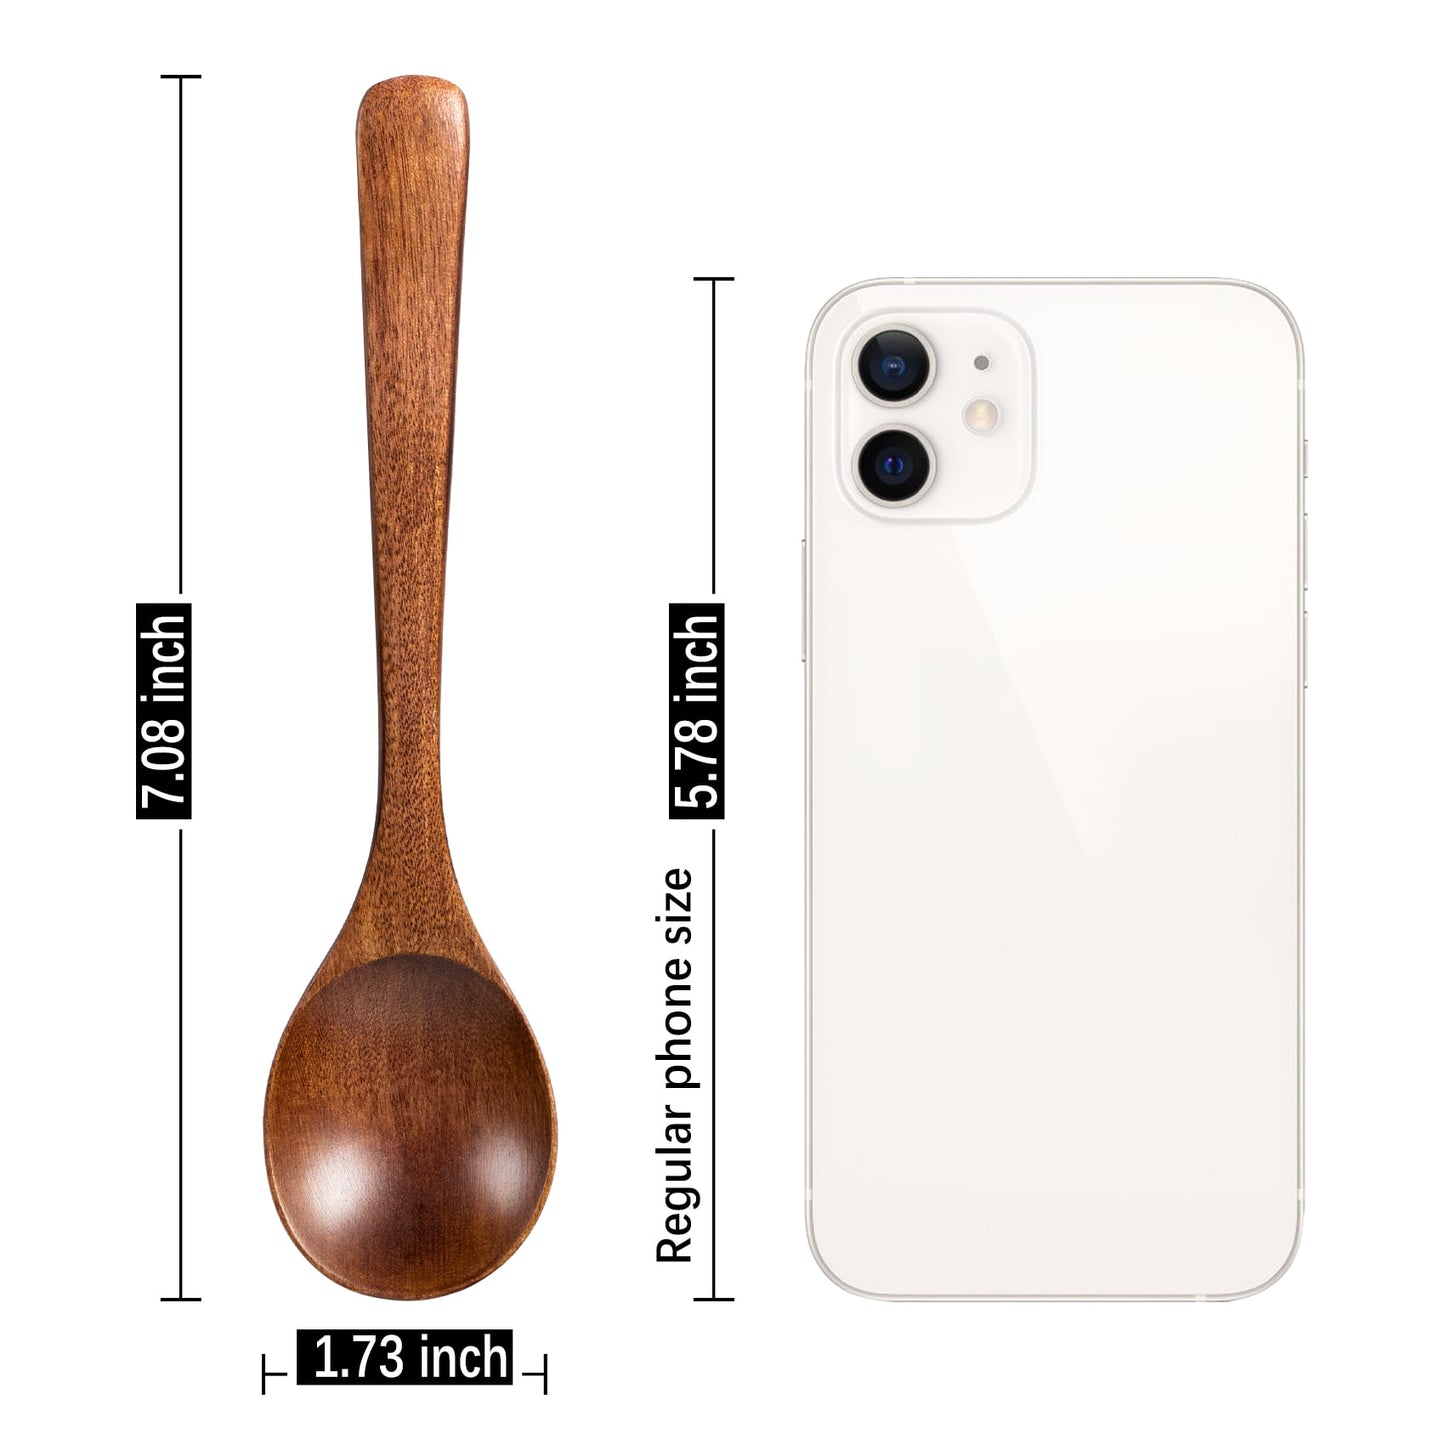 The length of the small wooden table spoon is 7inch and the width is 1.7inch